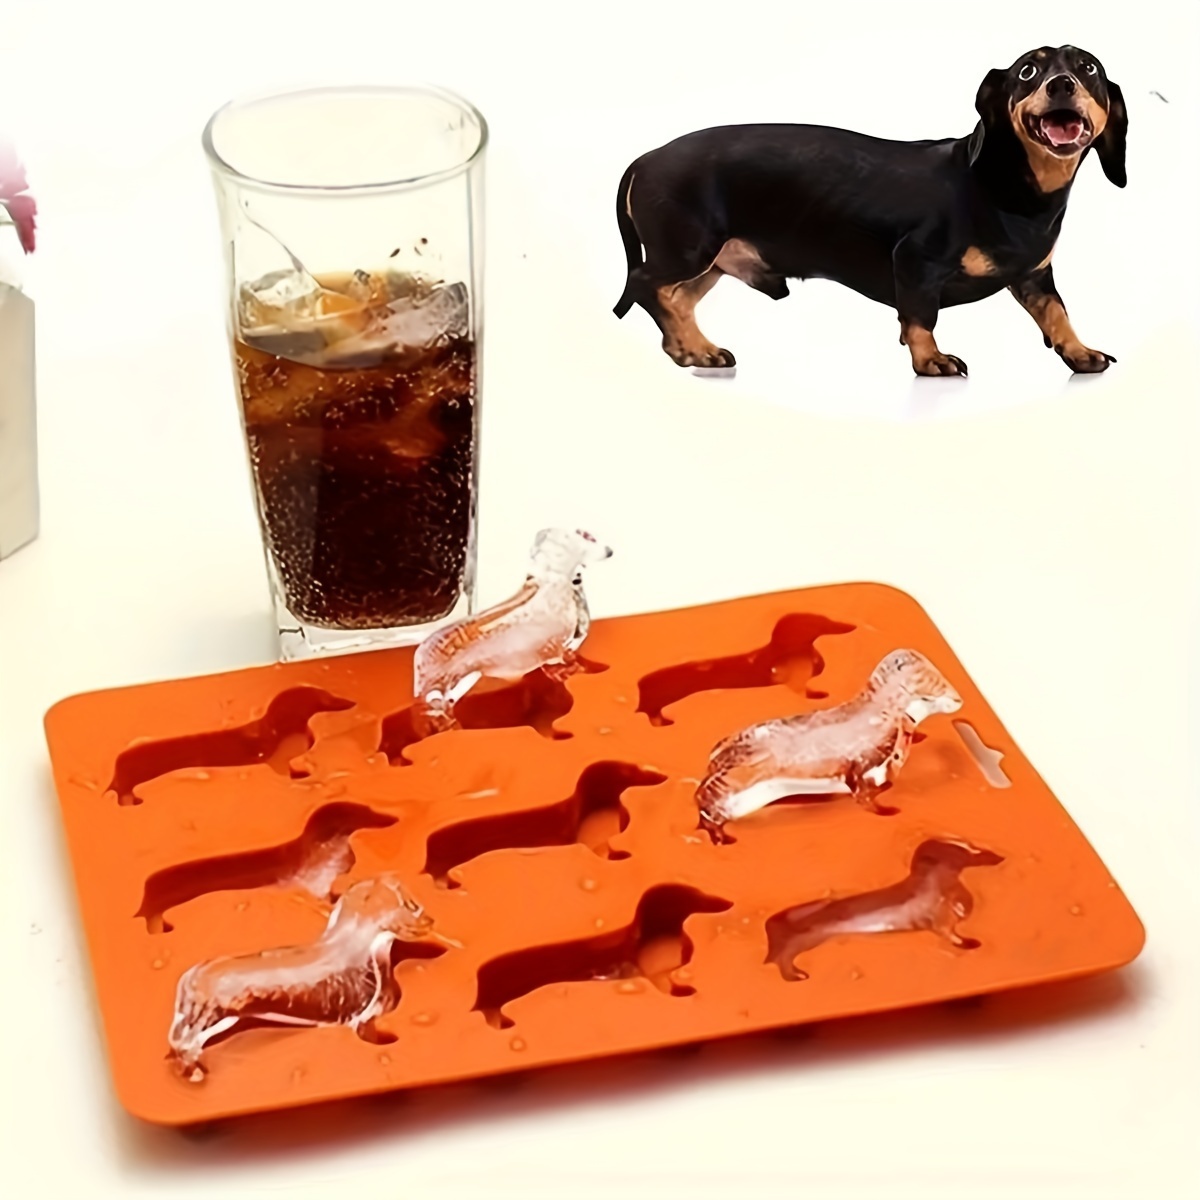 Penguin Ice Cube Mold, Fun Shape Ice Cube Tray, Silicone Whiskey Ice Mold  with Clear Funnel-type Lid, Make 4 Cute Penguin Ice Balls for